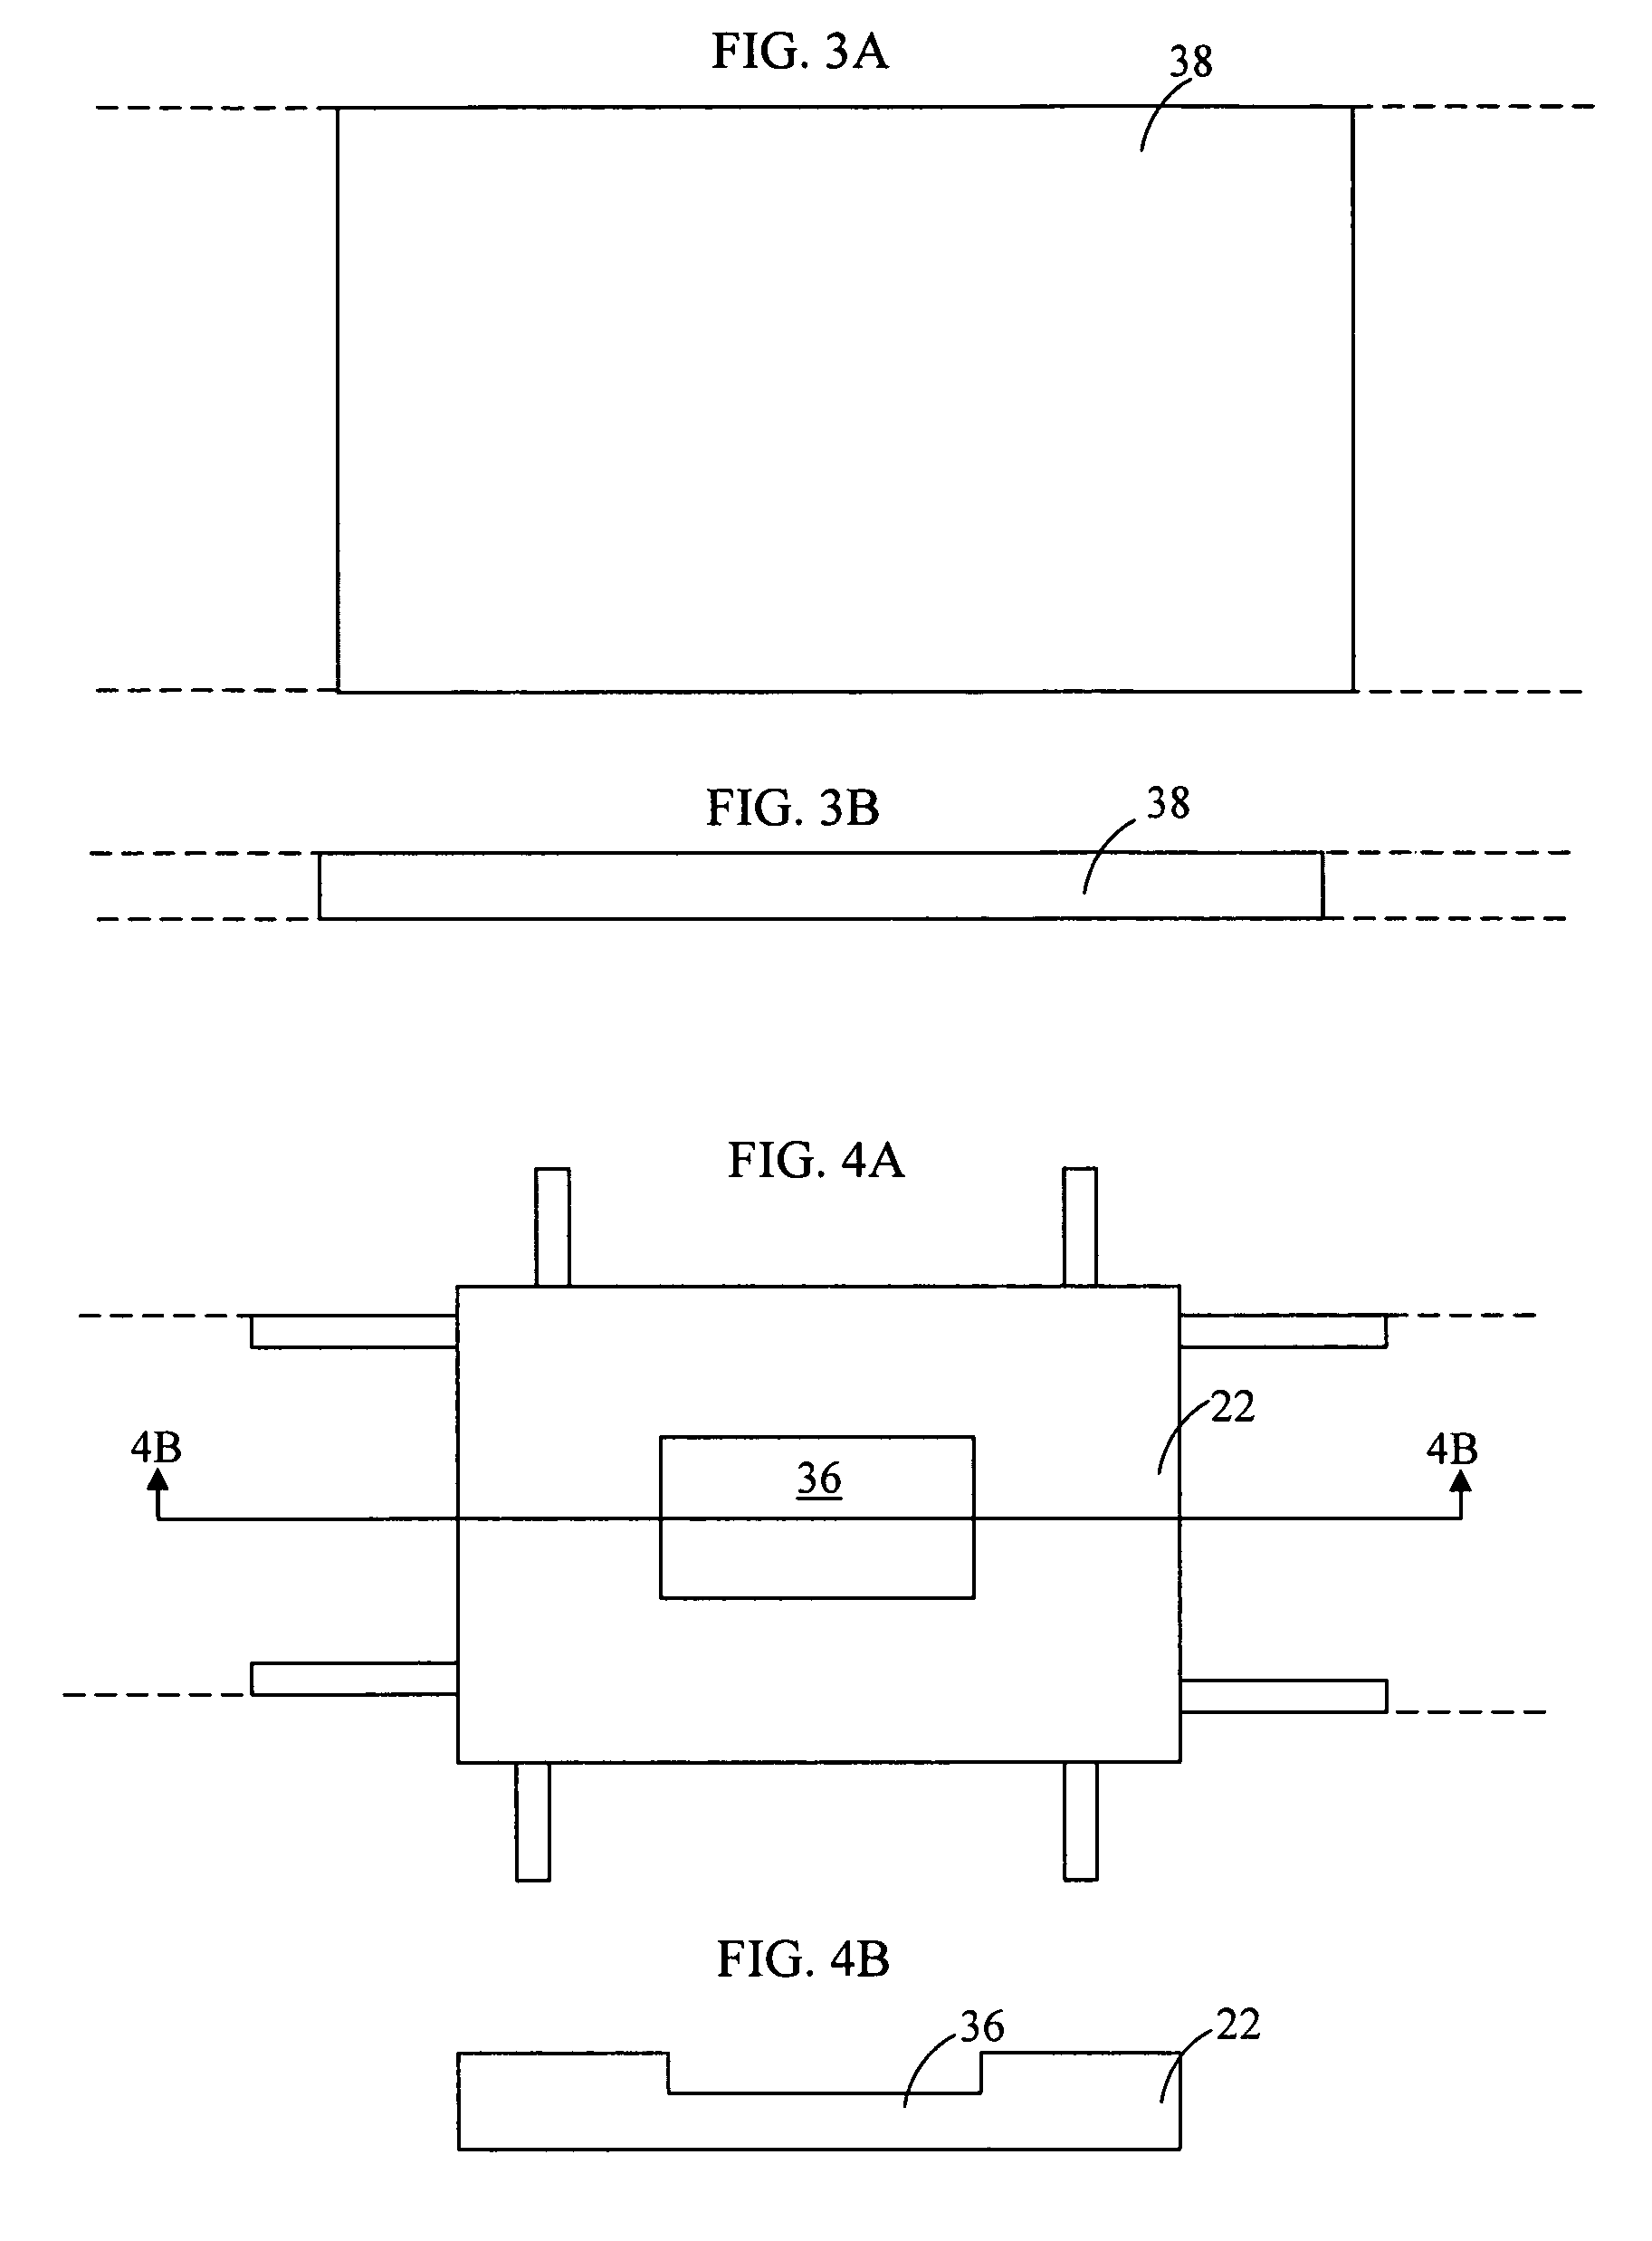 Leadless plastic chip carrier and method of fabricating same